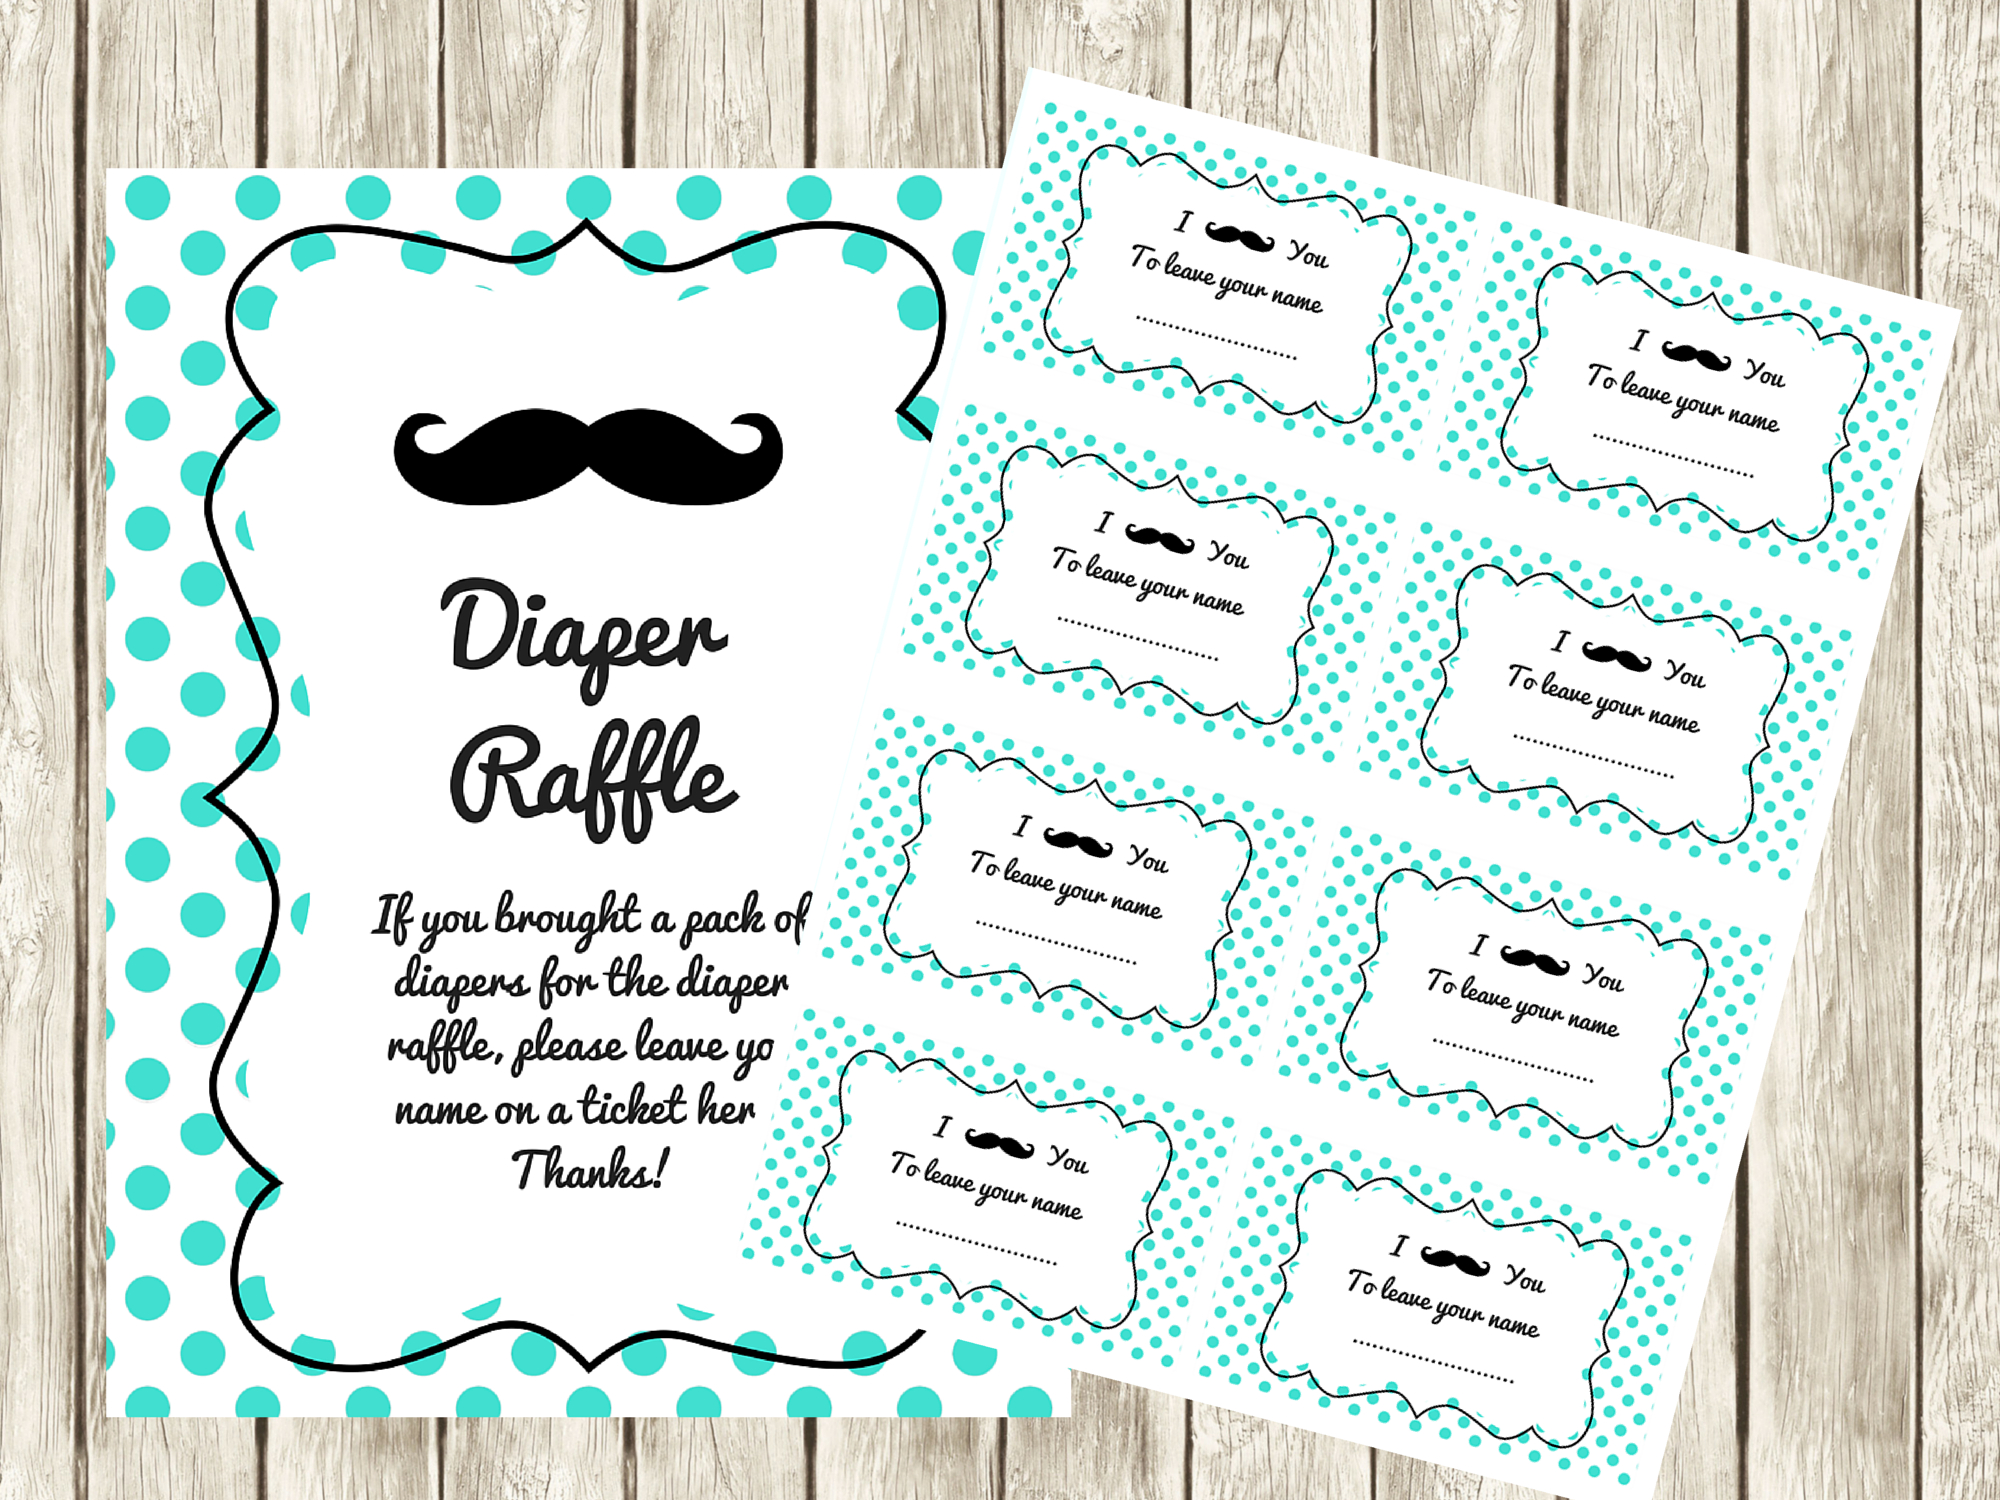 Free Printable Diaper Raffle Tickets For Baby Shower - Image - Free Printable Diaper Raffle Tickets For Boy Baby Shower